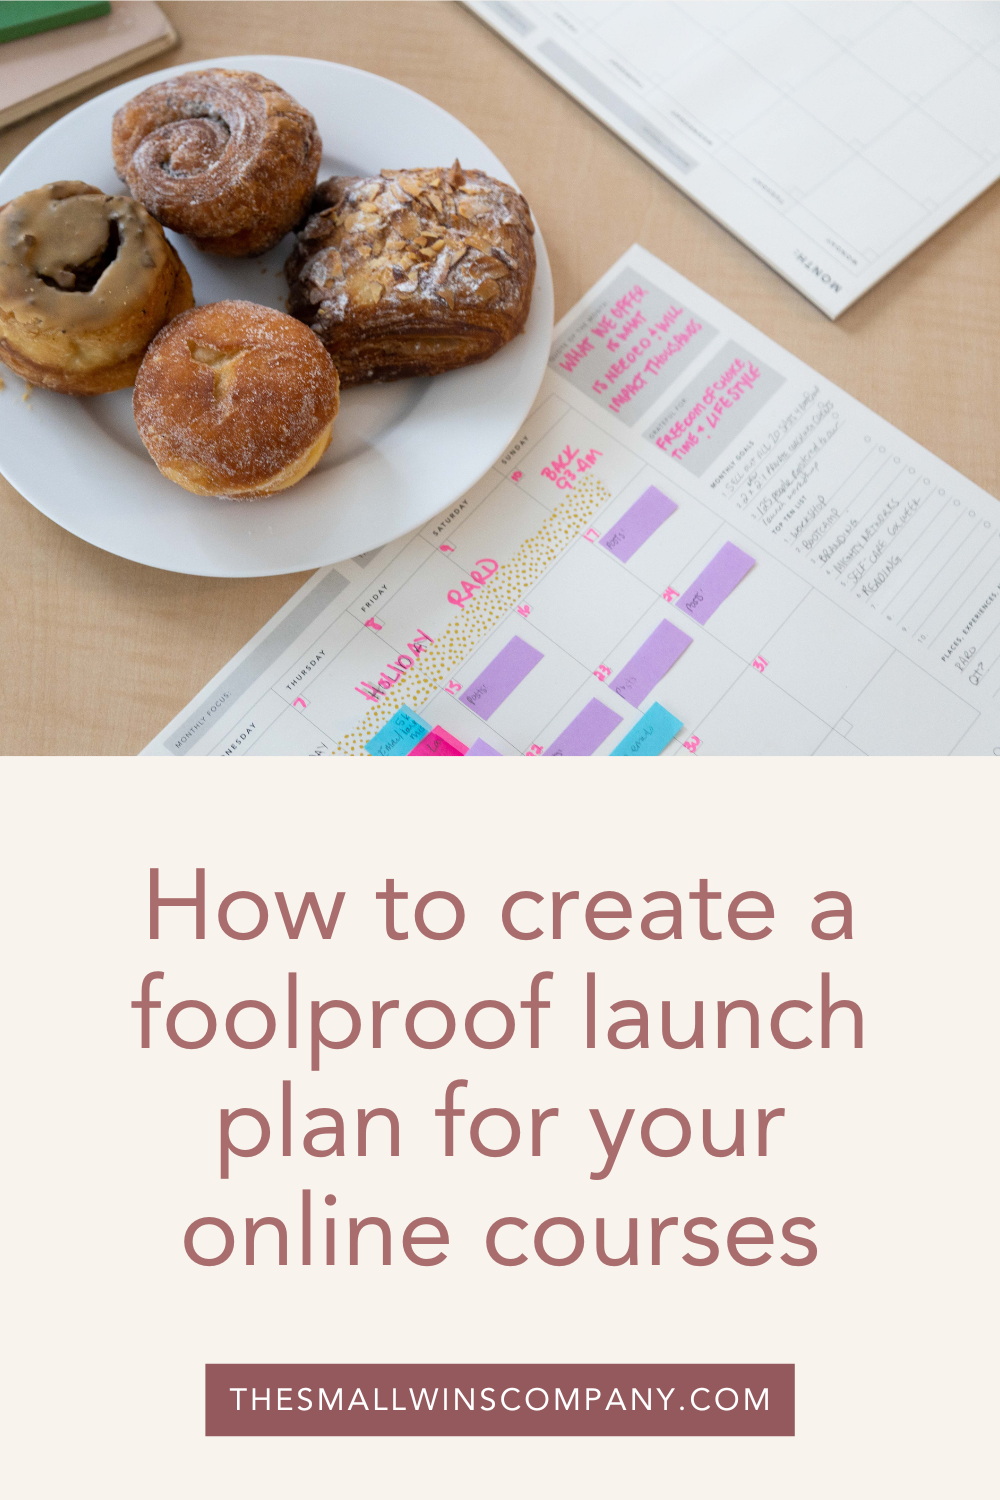 How to create a foolproof launch plan for your online course